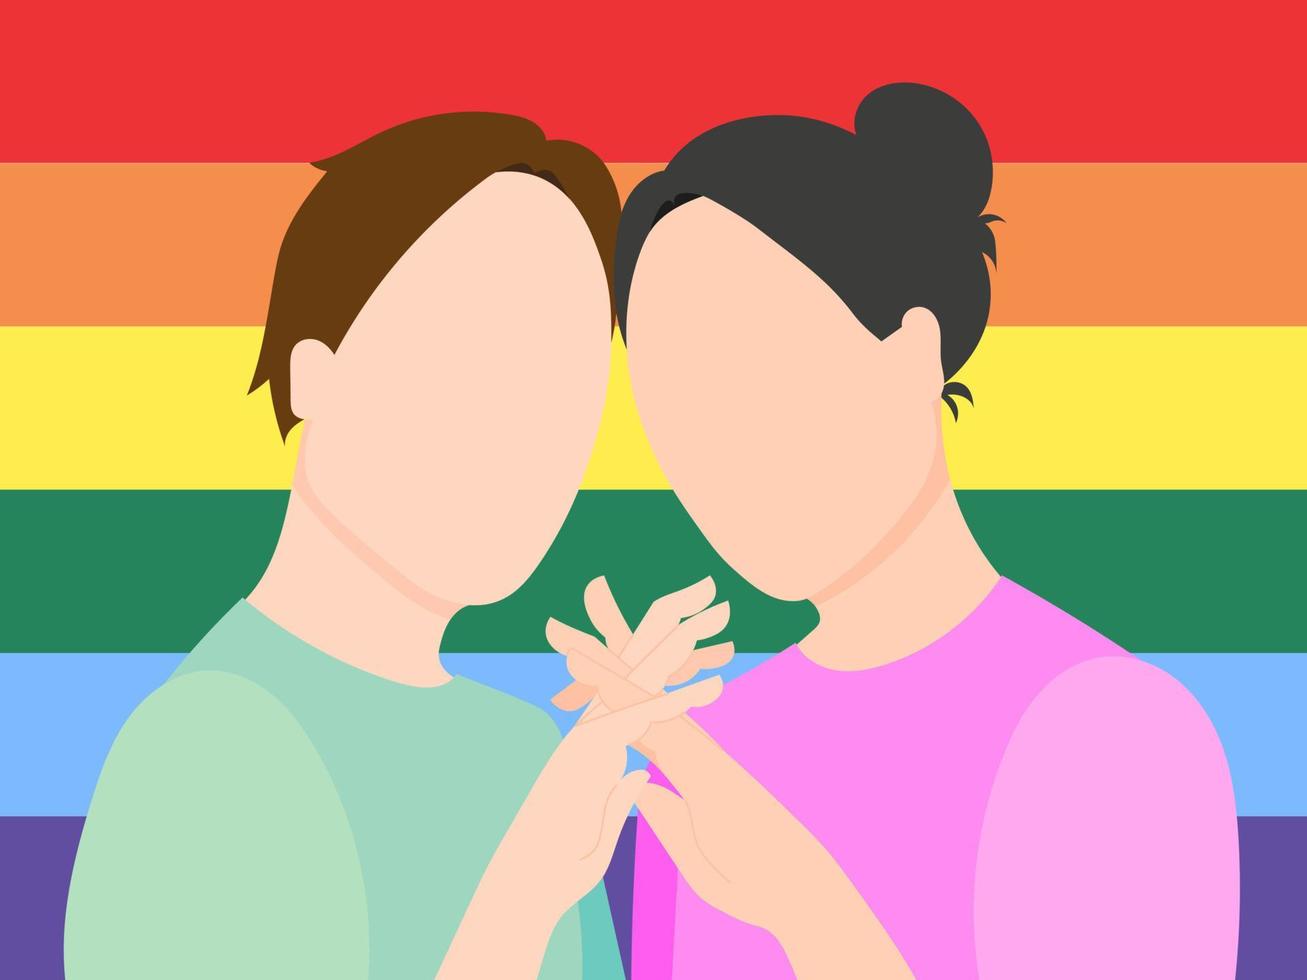 A gay couple in love holding hands against the background of an LGBT flag. Flat vector illustration.